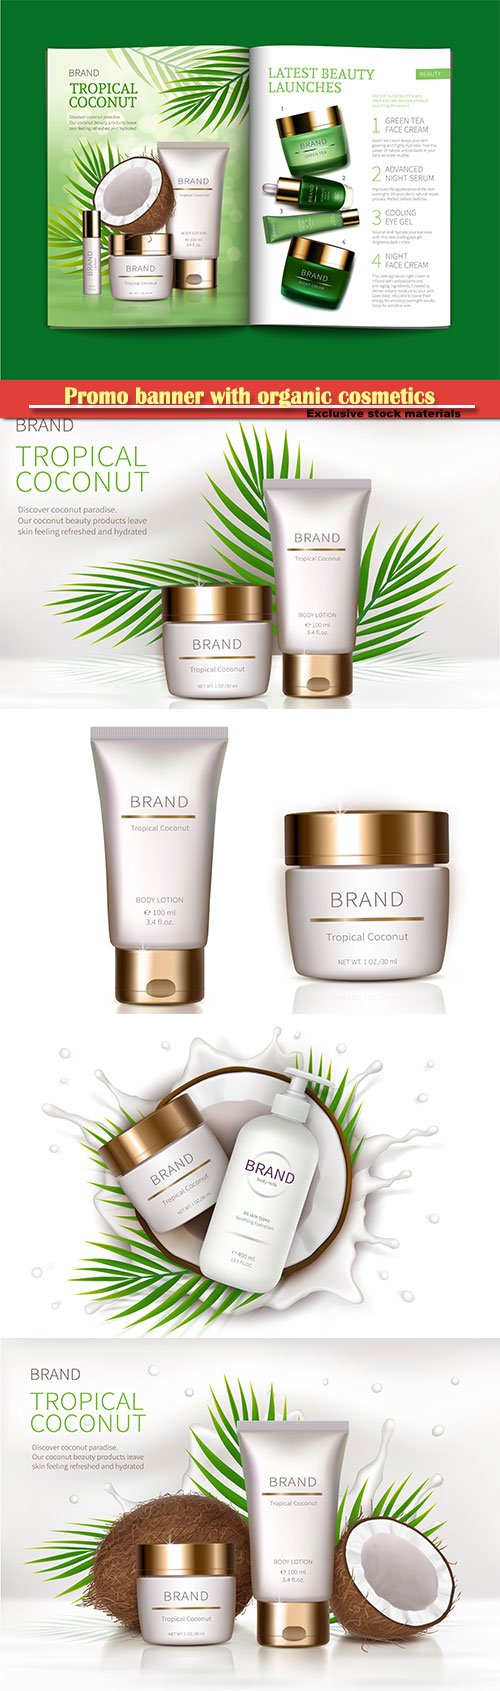 Mock up promo banner with organic cosmetics